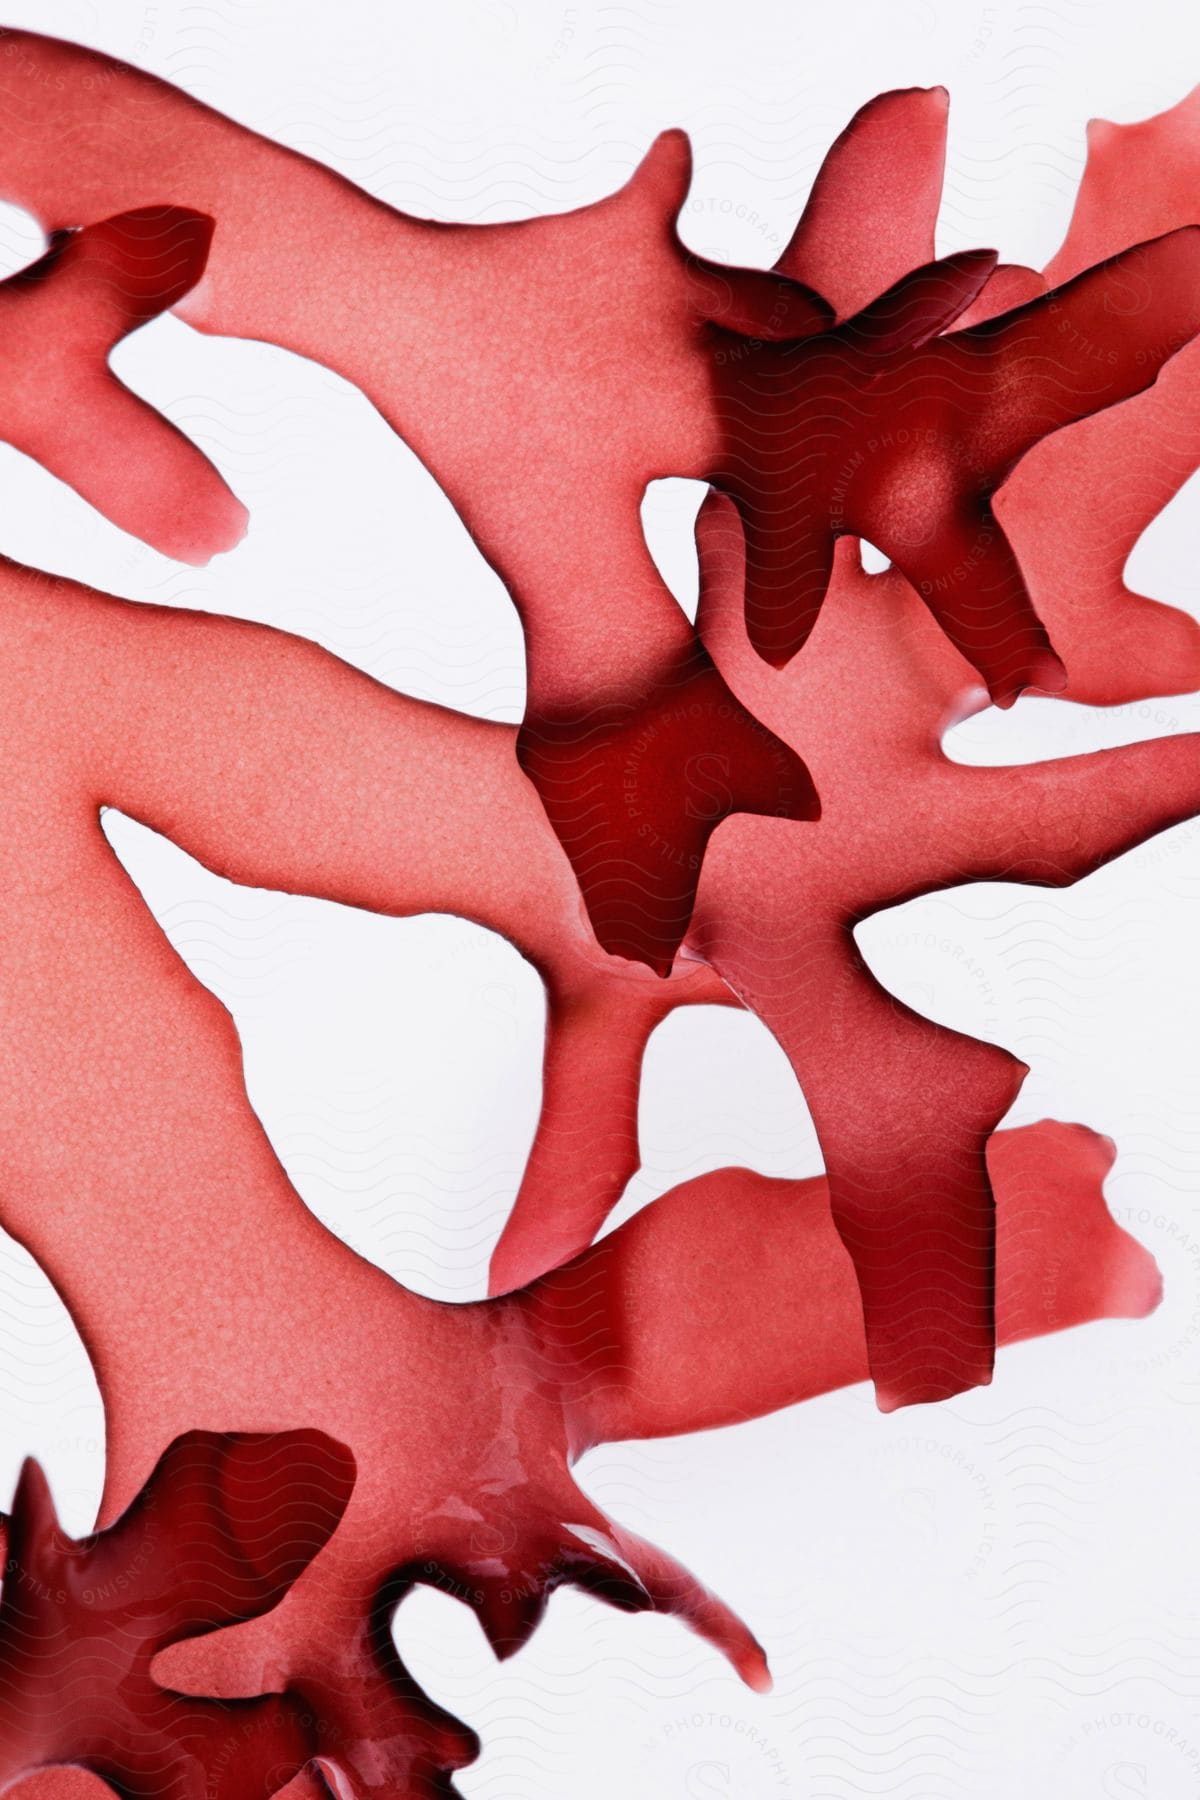 Abstract shapes of red macro algae against a white background.